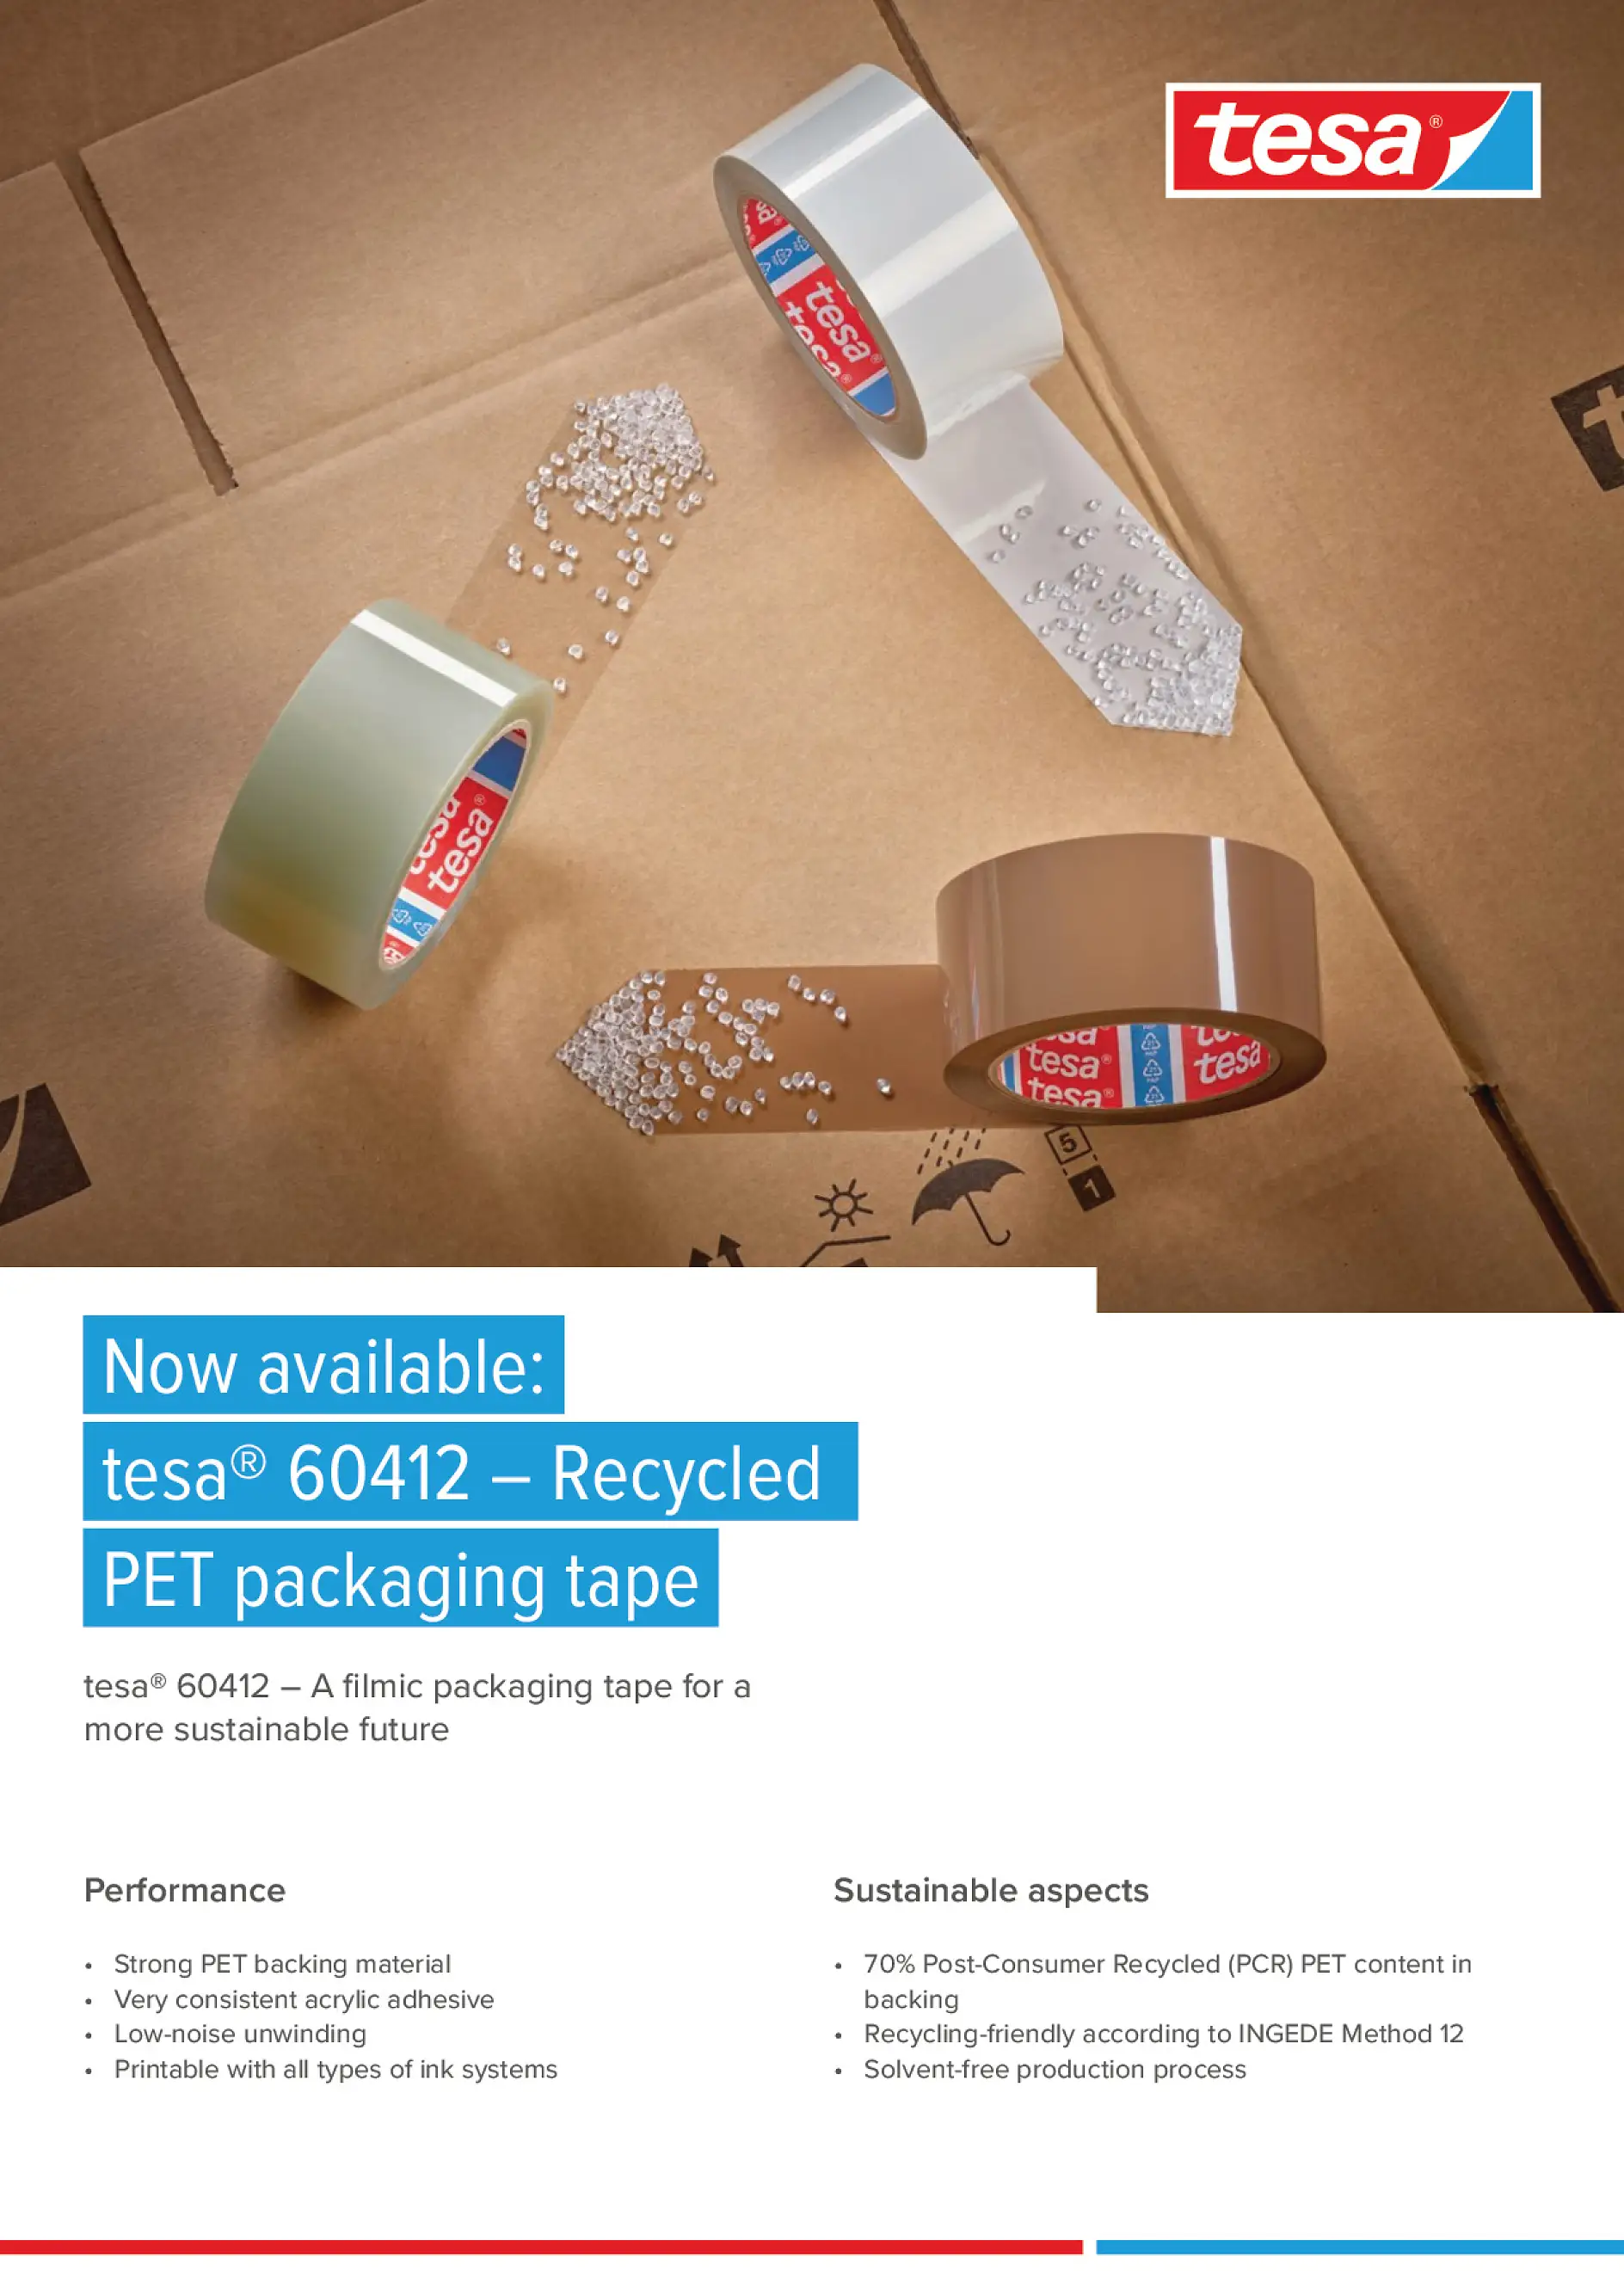 tesa-ID-60412-Recycled-PET-packaging-tape-new-colors-flyer